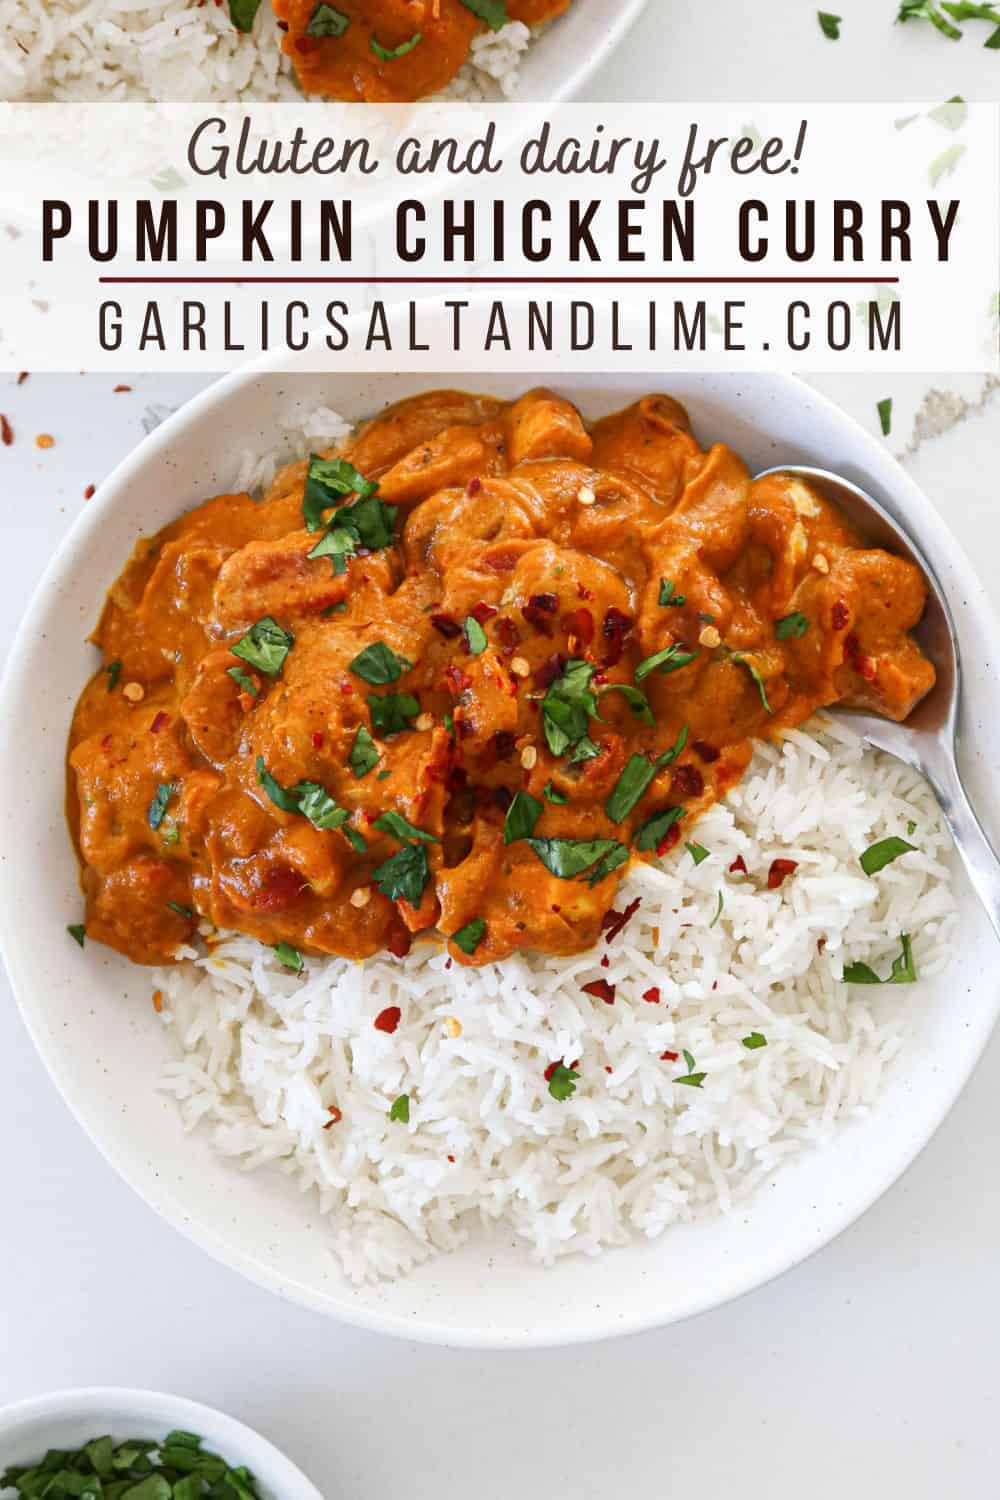 Bowl of pumpkin chicken curry and rice with text overlay for Pinterest.